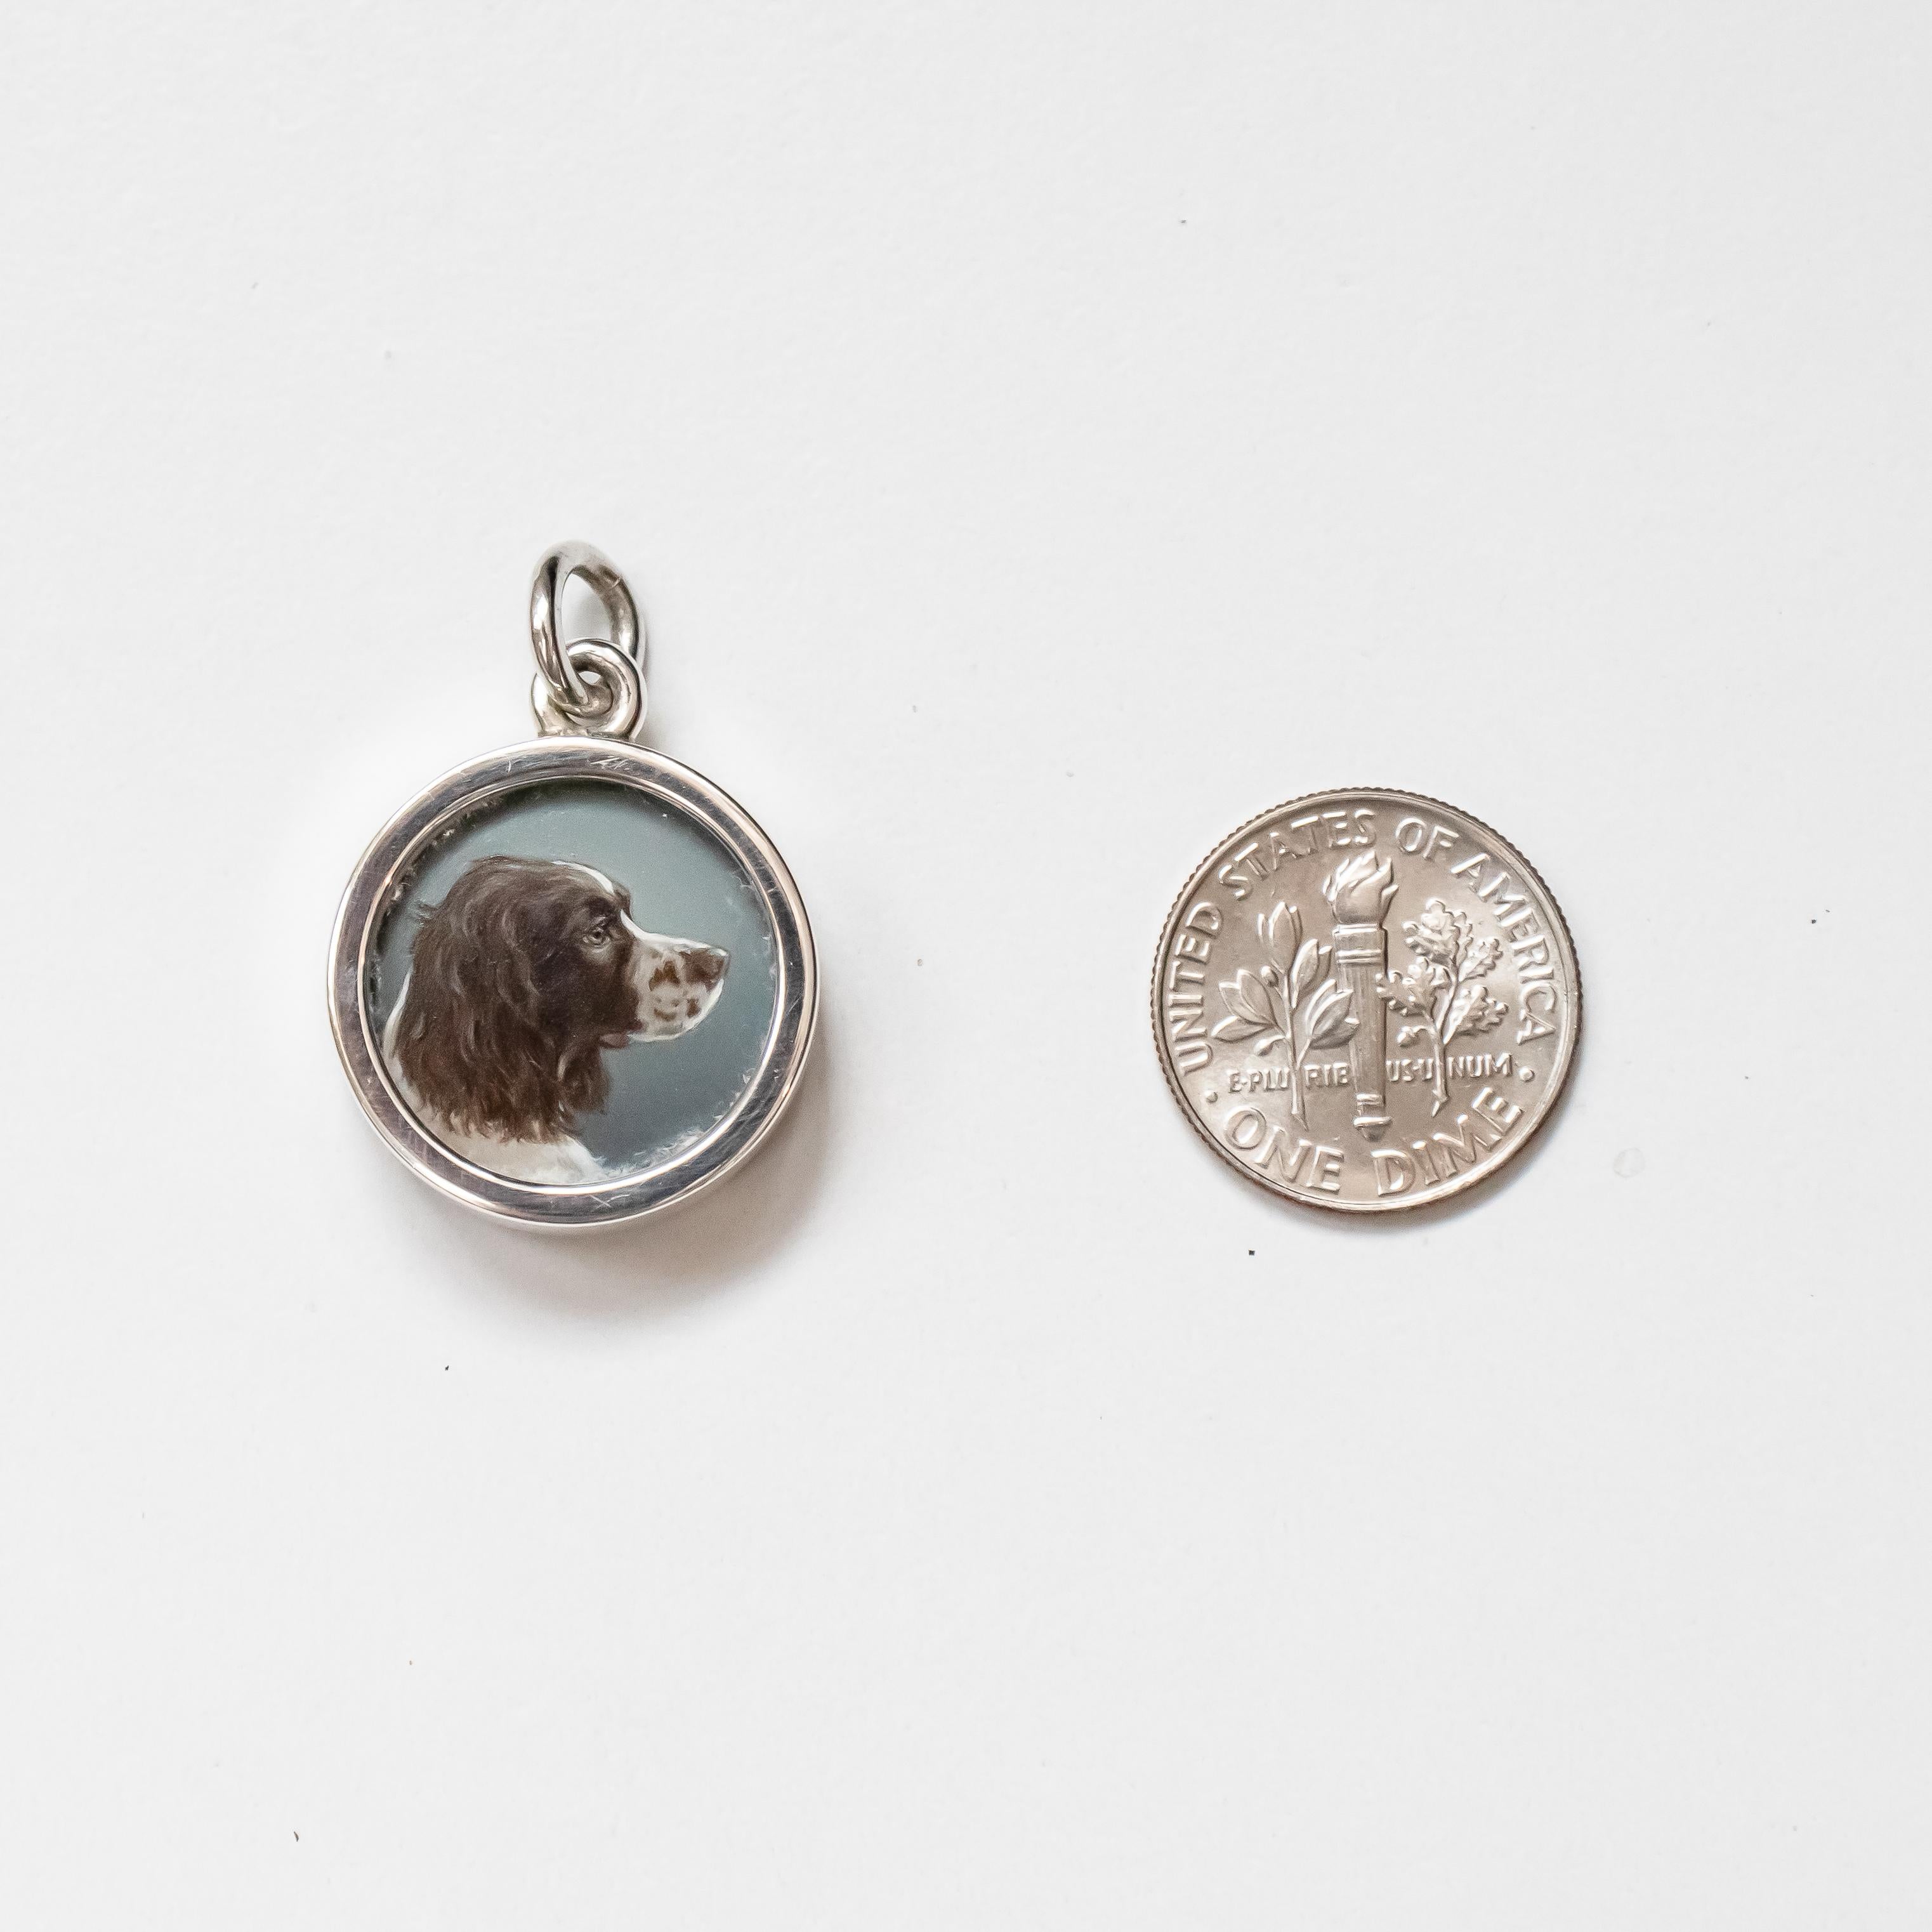 Original miniature oil painting on ivorine by esteemed miniaturist Beth de Loiselle (United States) of a Spaniel dog encased in a bespoke sterling silver ¾” charm by the master jewelry maker Paul Eaton VPRMS MAA (England) is a collectable, stunning